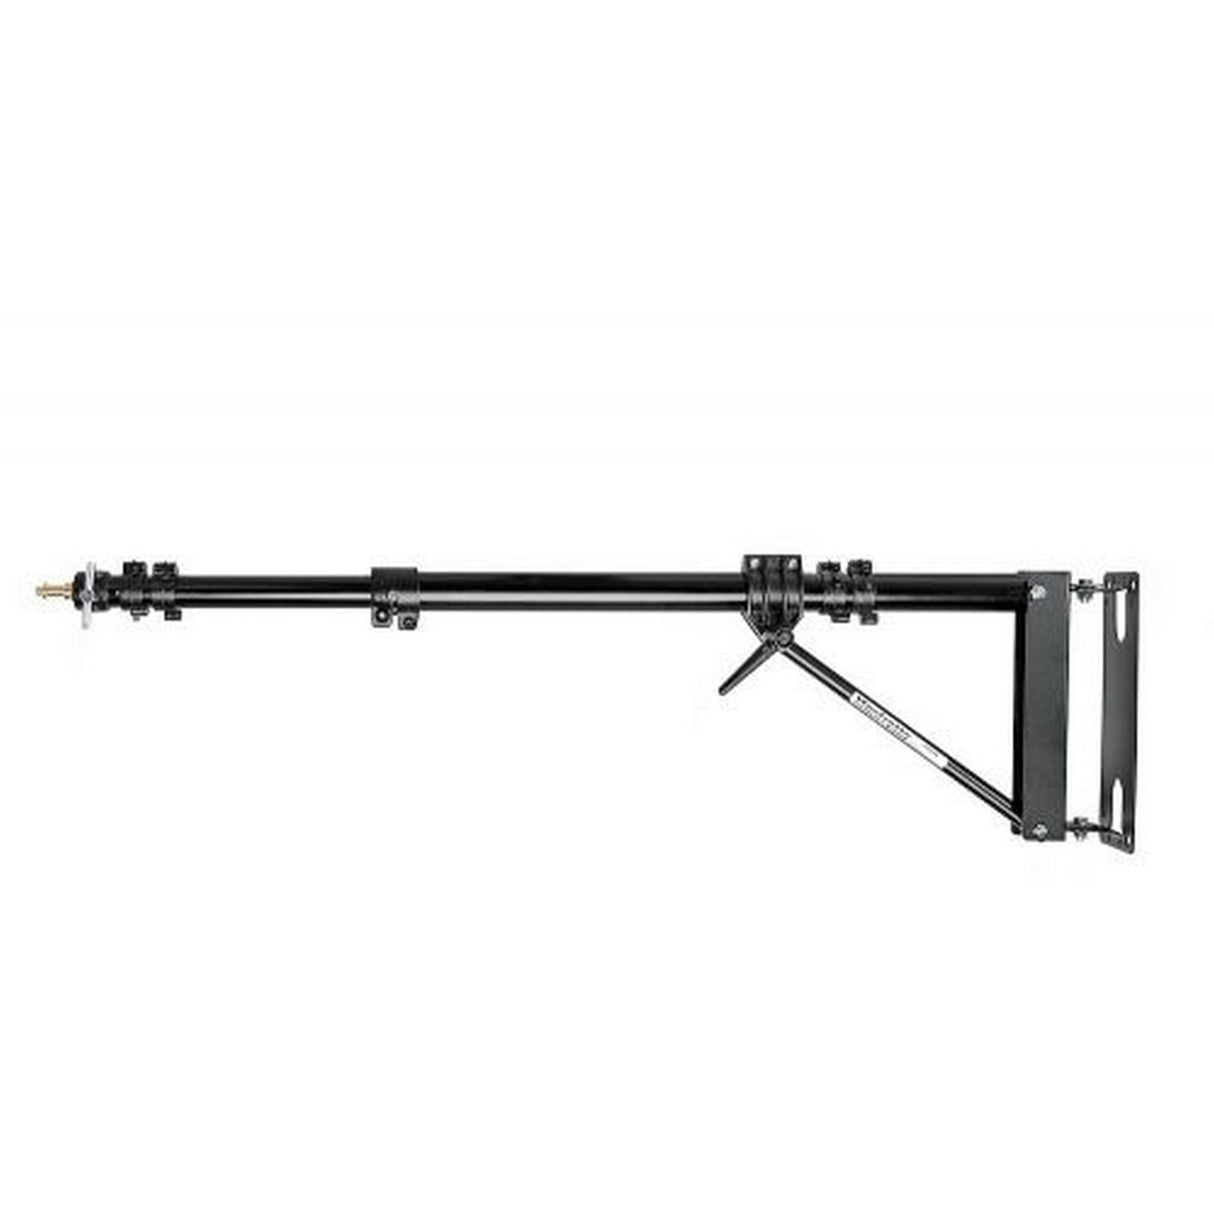 Manfrotto 098SHB Short Wall Boom, Variable 30.75-48 Inches